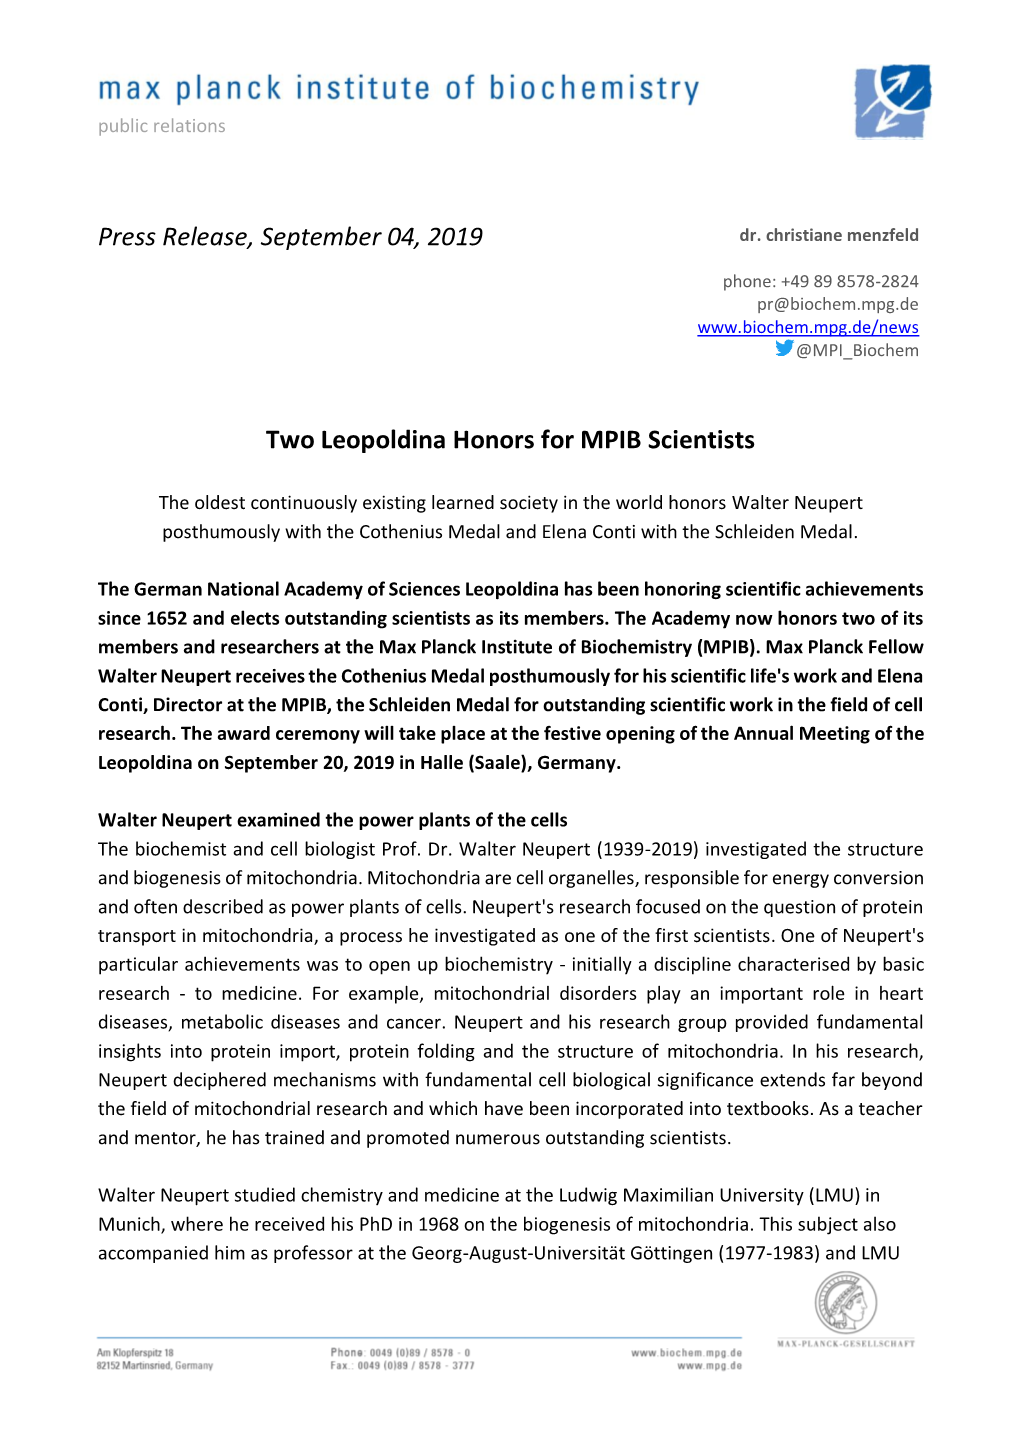 Press Release, September 04, 2019 Two Leopoldina Honors for MPIB